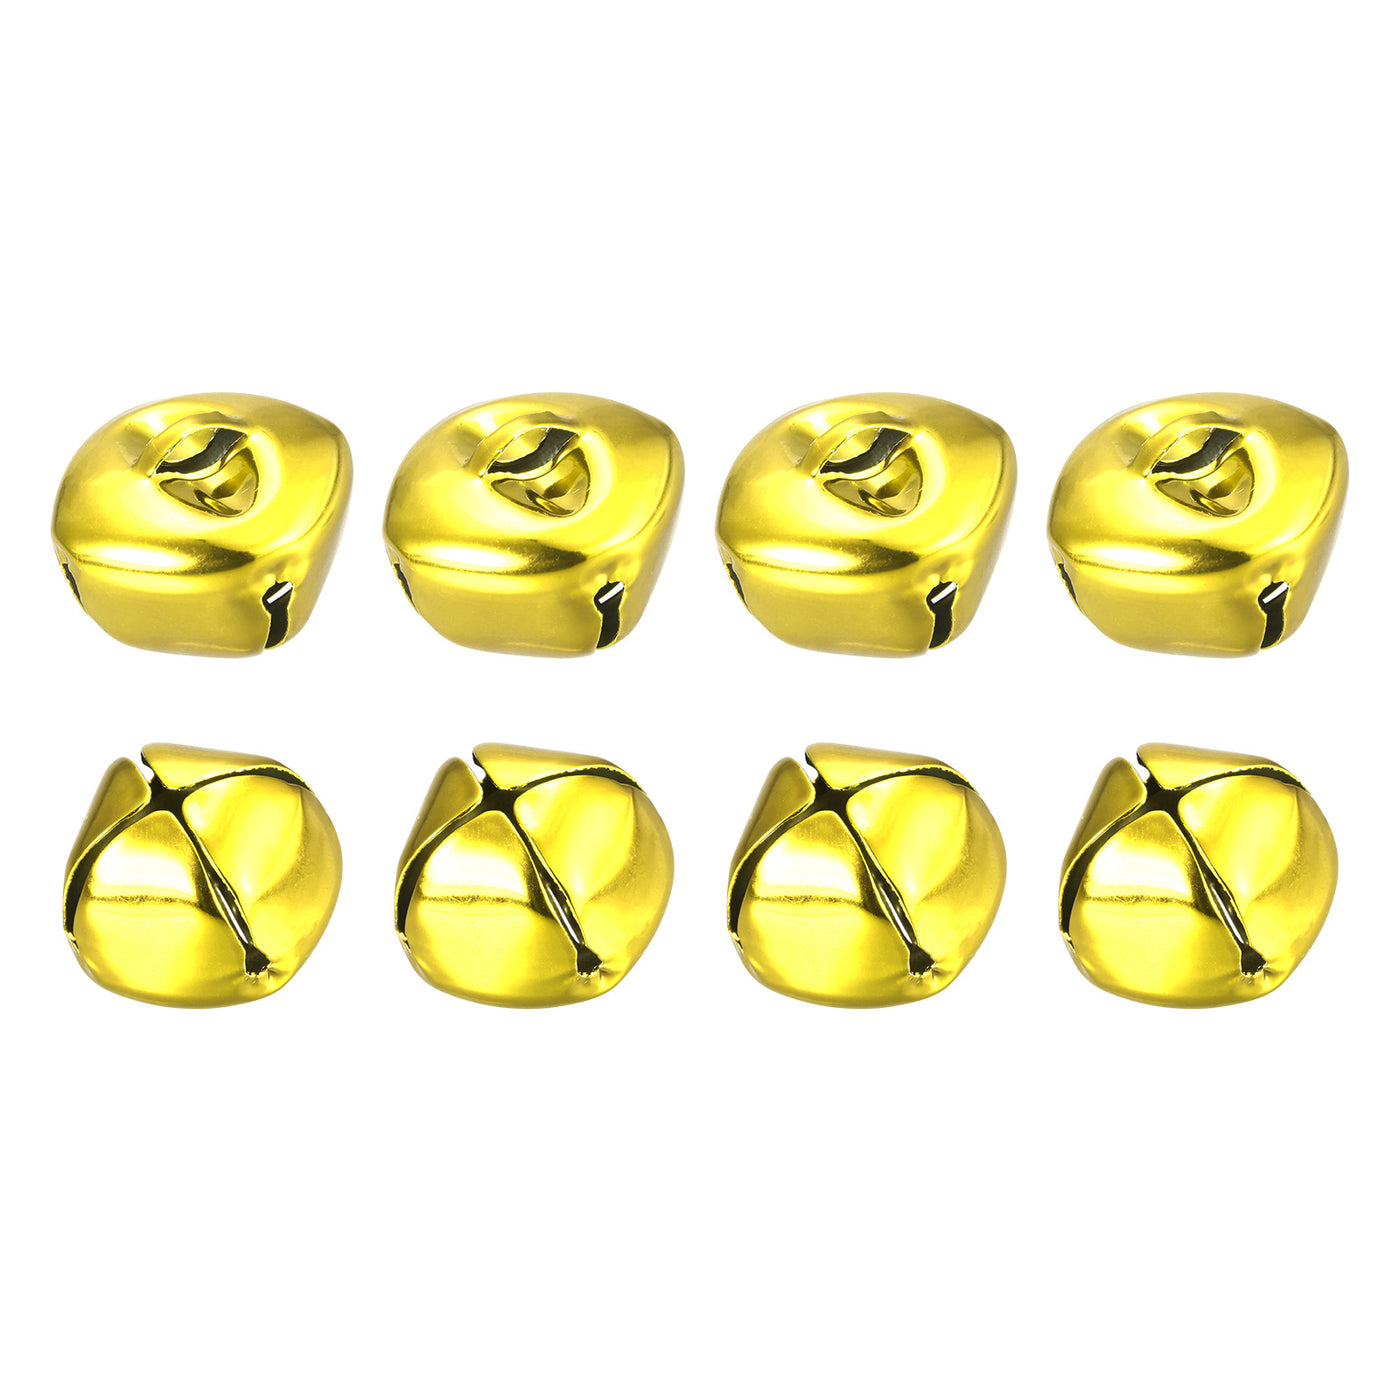 uxcell Uxcell Jingle Bells, 25mm 8pcs Small Bells for Crafts DIY Christmas, Gold Tone